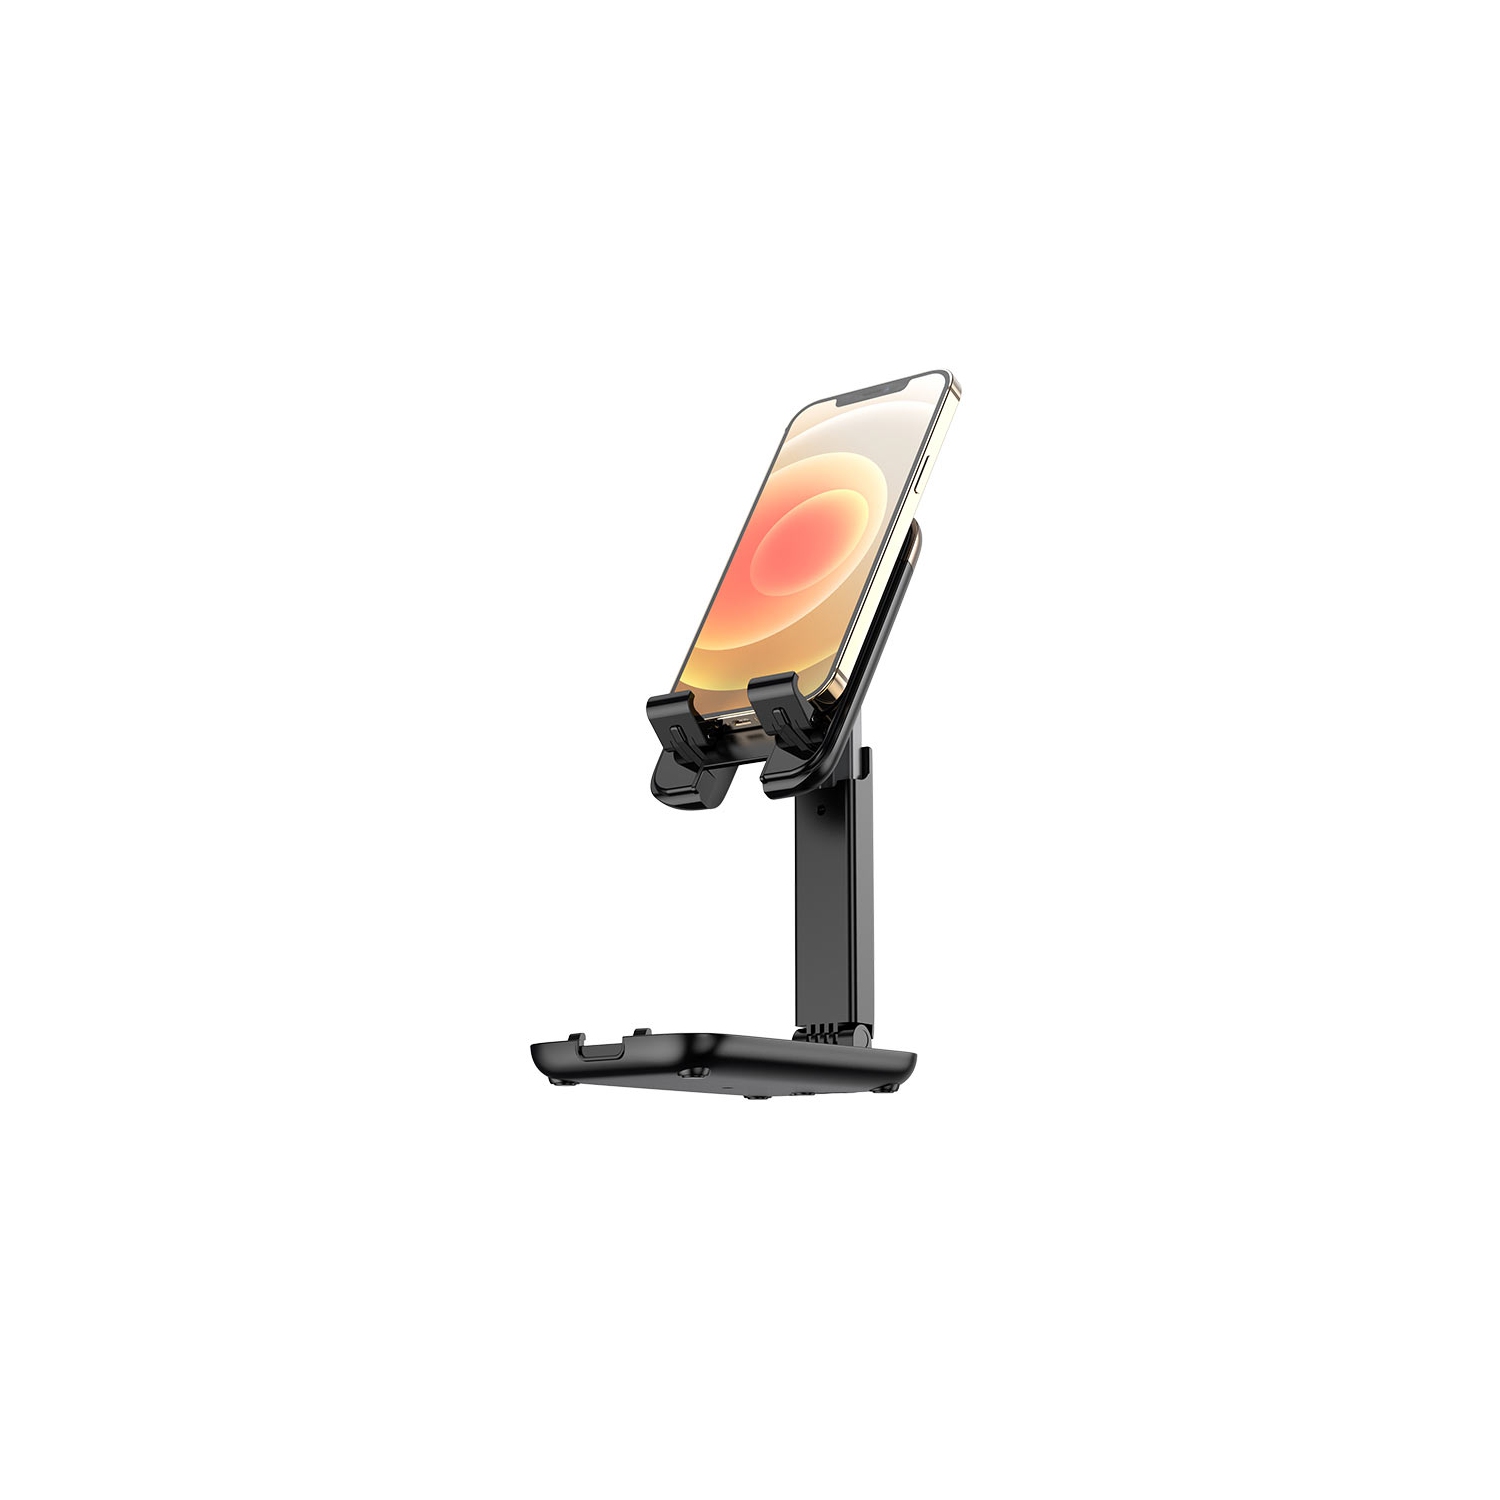 【CS】 Portable Adjustable Aluminum Alloy Desktop Phone Mount Stand Holder for 4.7" - 14" iPad Tablet / iPhone Cell Phone, Black